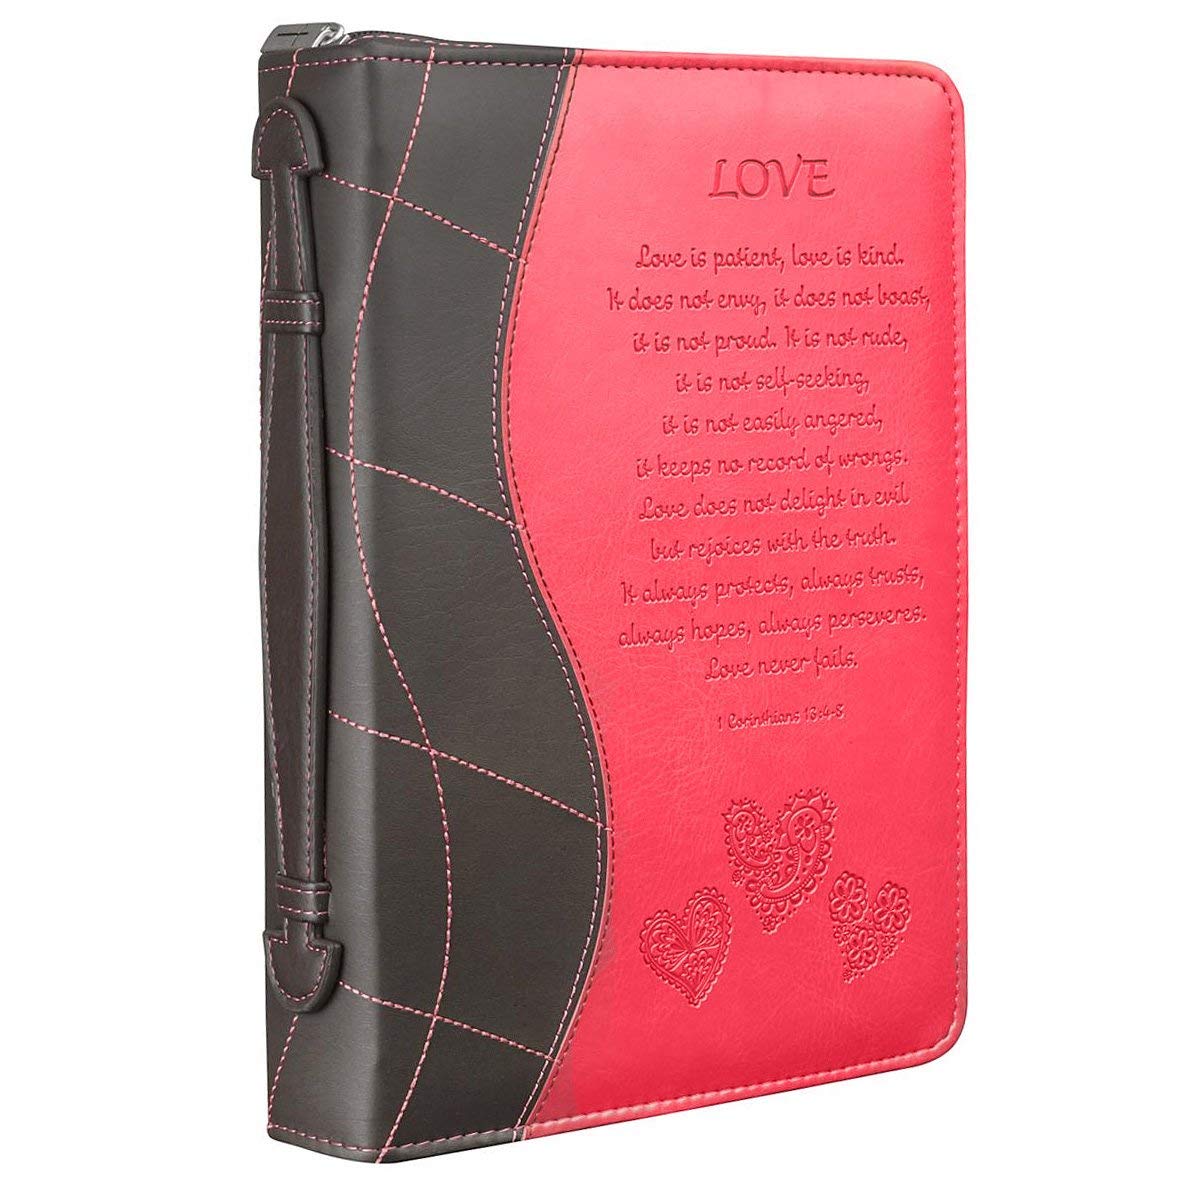 Book Cover Christian Art Gifts Women's Fashion Bible Cover Love 1 Corinthians 13:4-8, Pink/Brown Faux Leather, Large